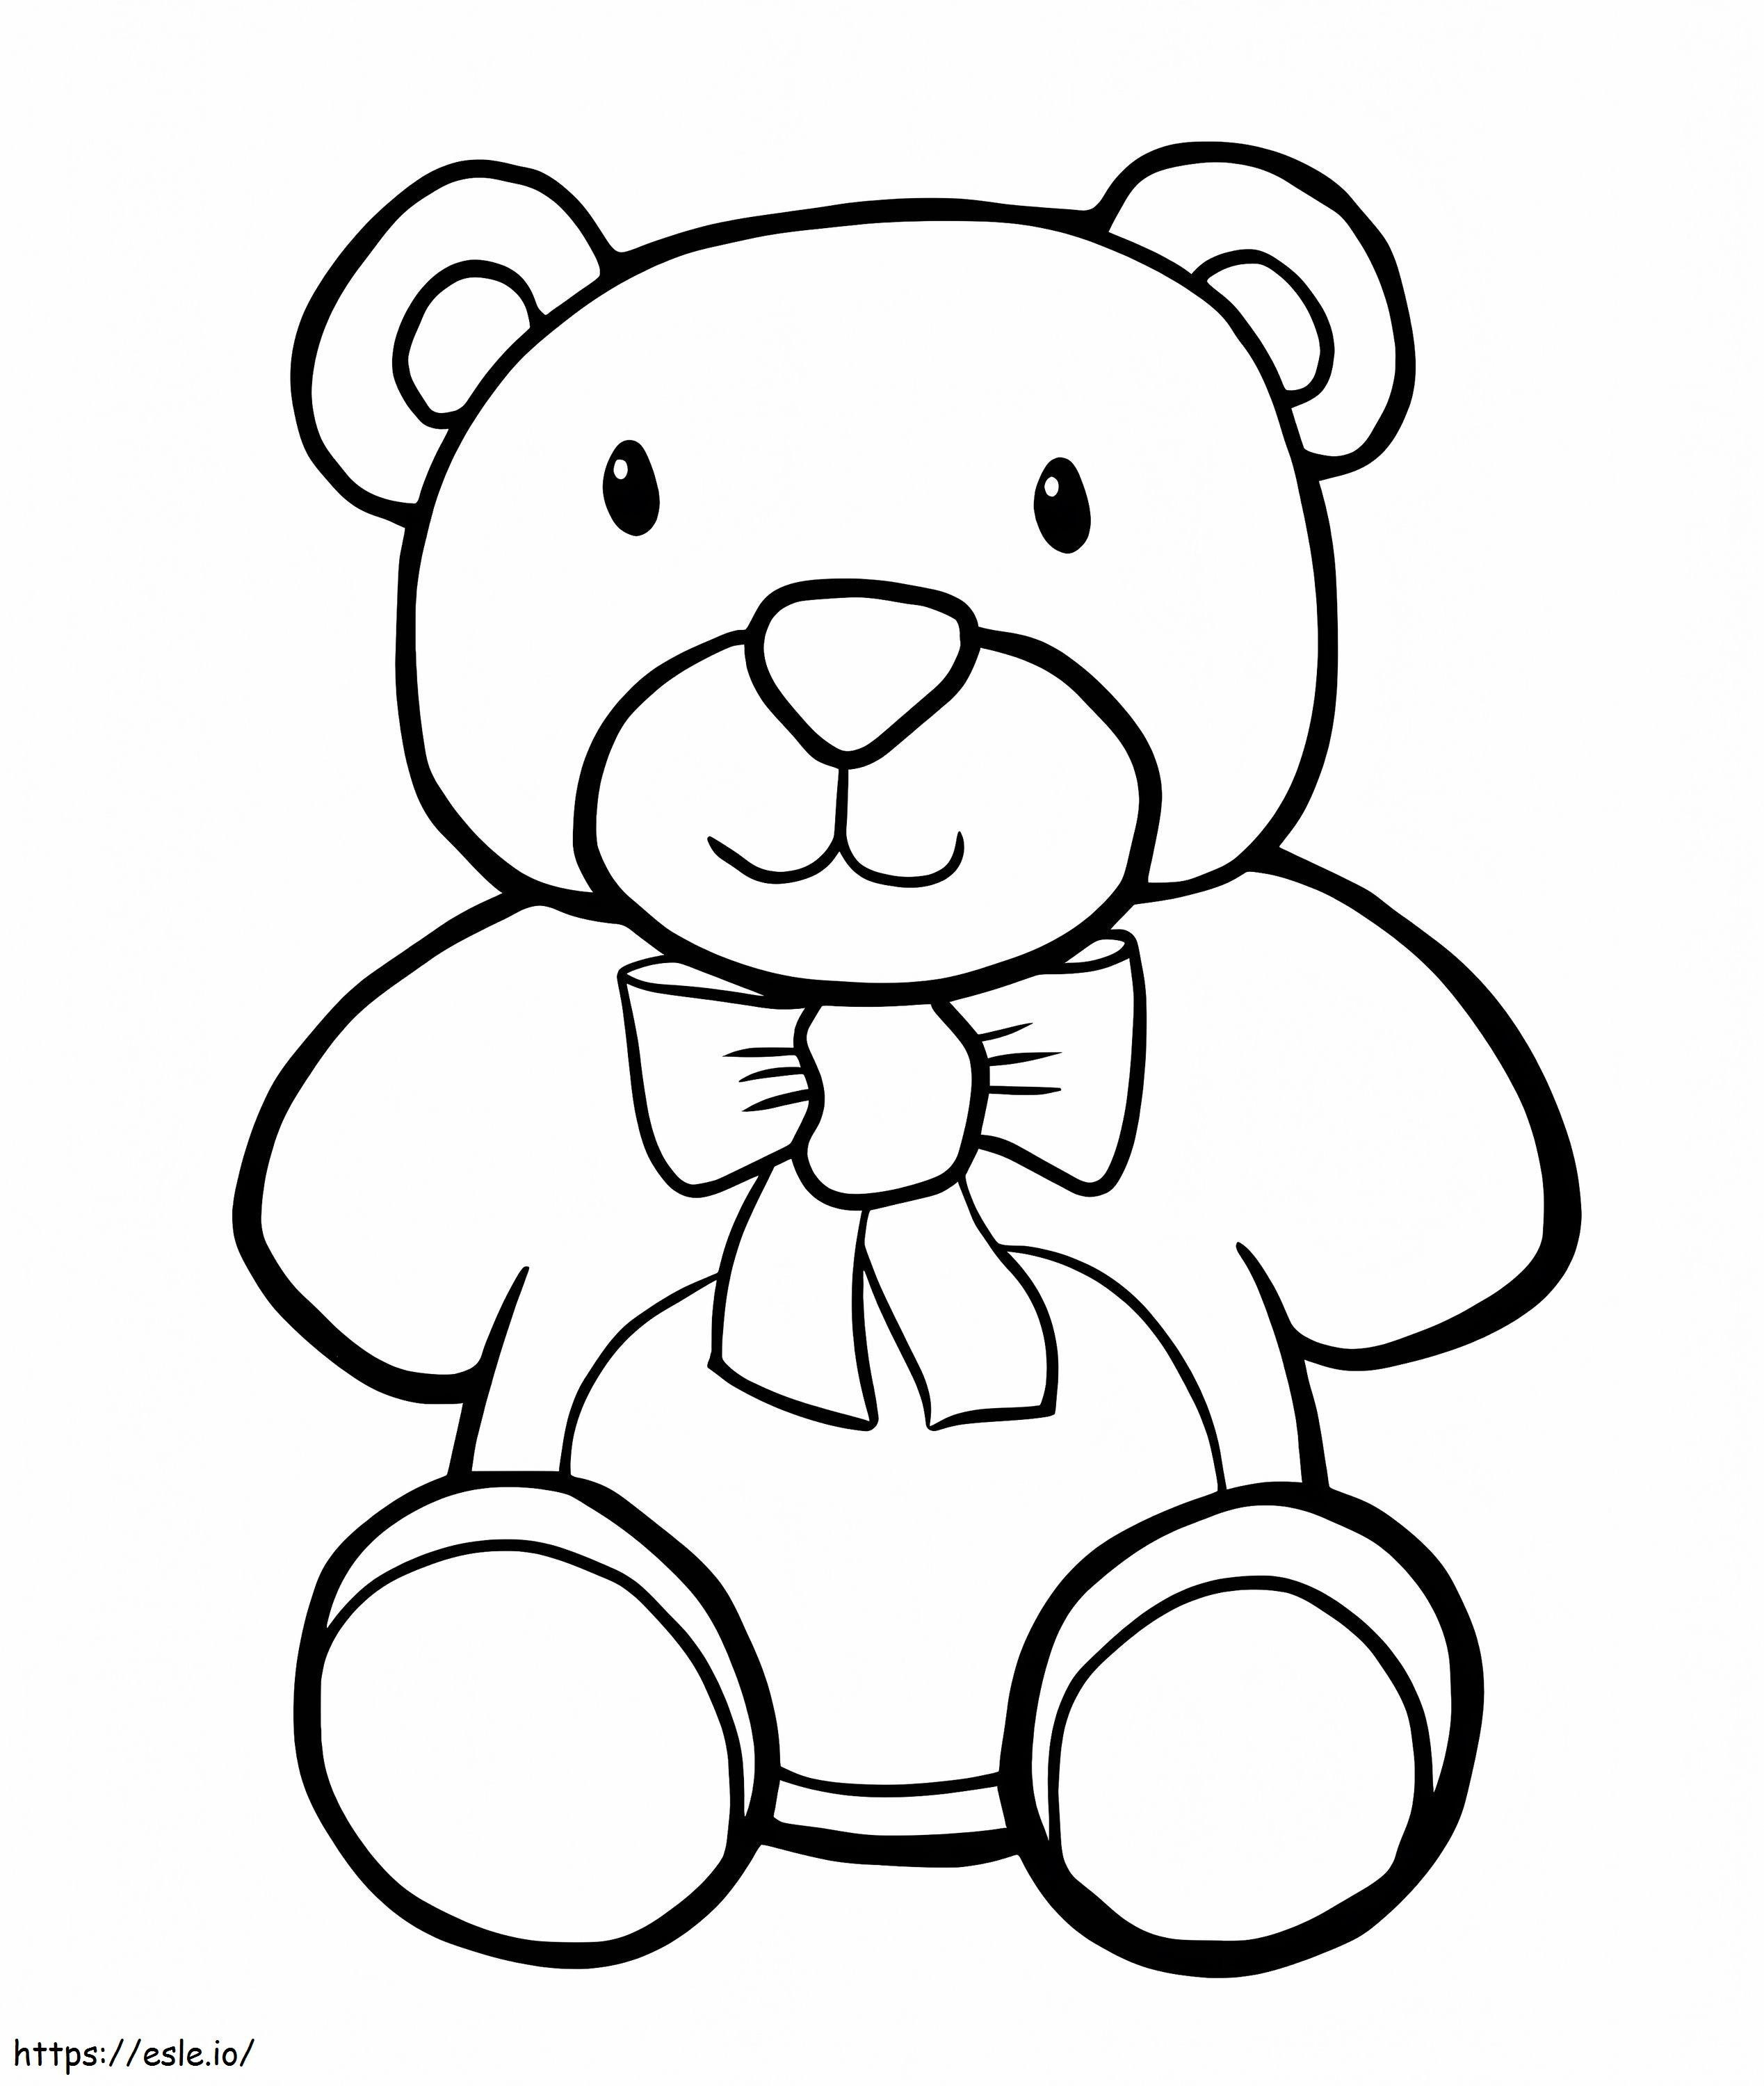 Simple Teddy Bear coloring page